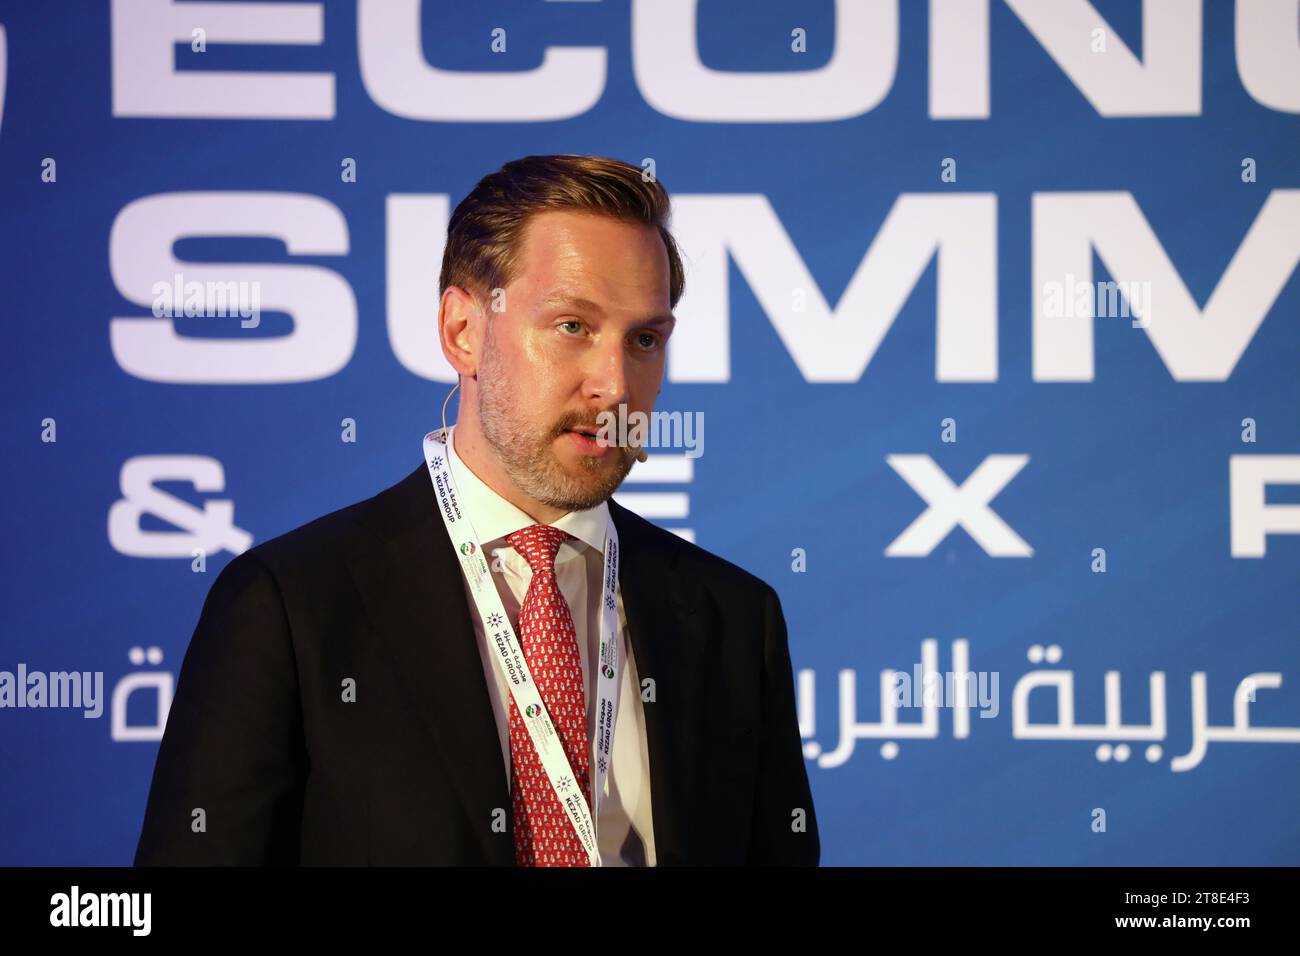 London, UK. 20 Nov 2023. Oliver Christian, UK Trade Commissioner for the Middle East, speaks at the Arab-British Economic Summit. Credit: Dominic Dudley/Alamy Live News Stock Photo